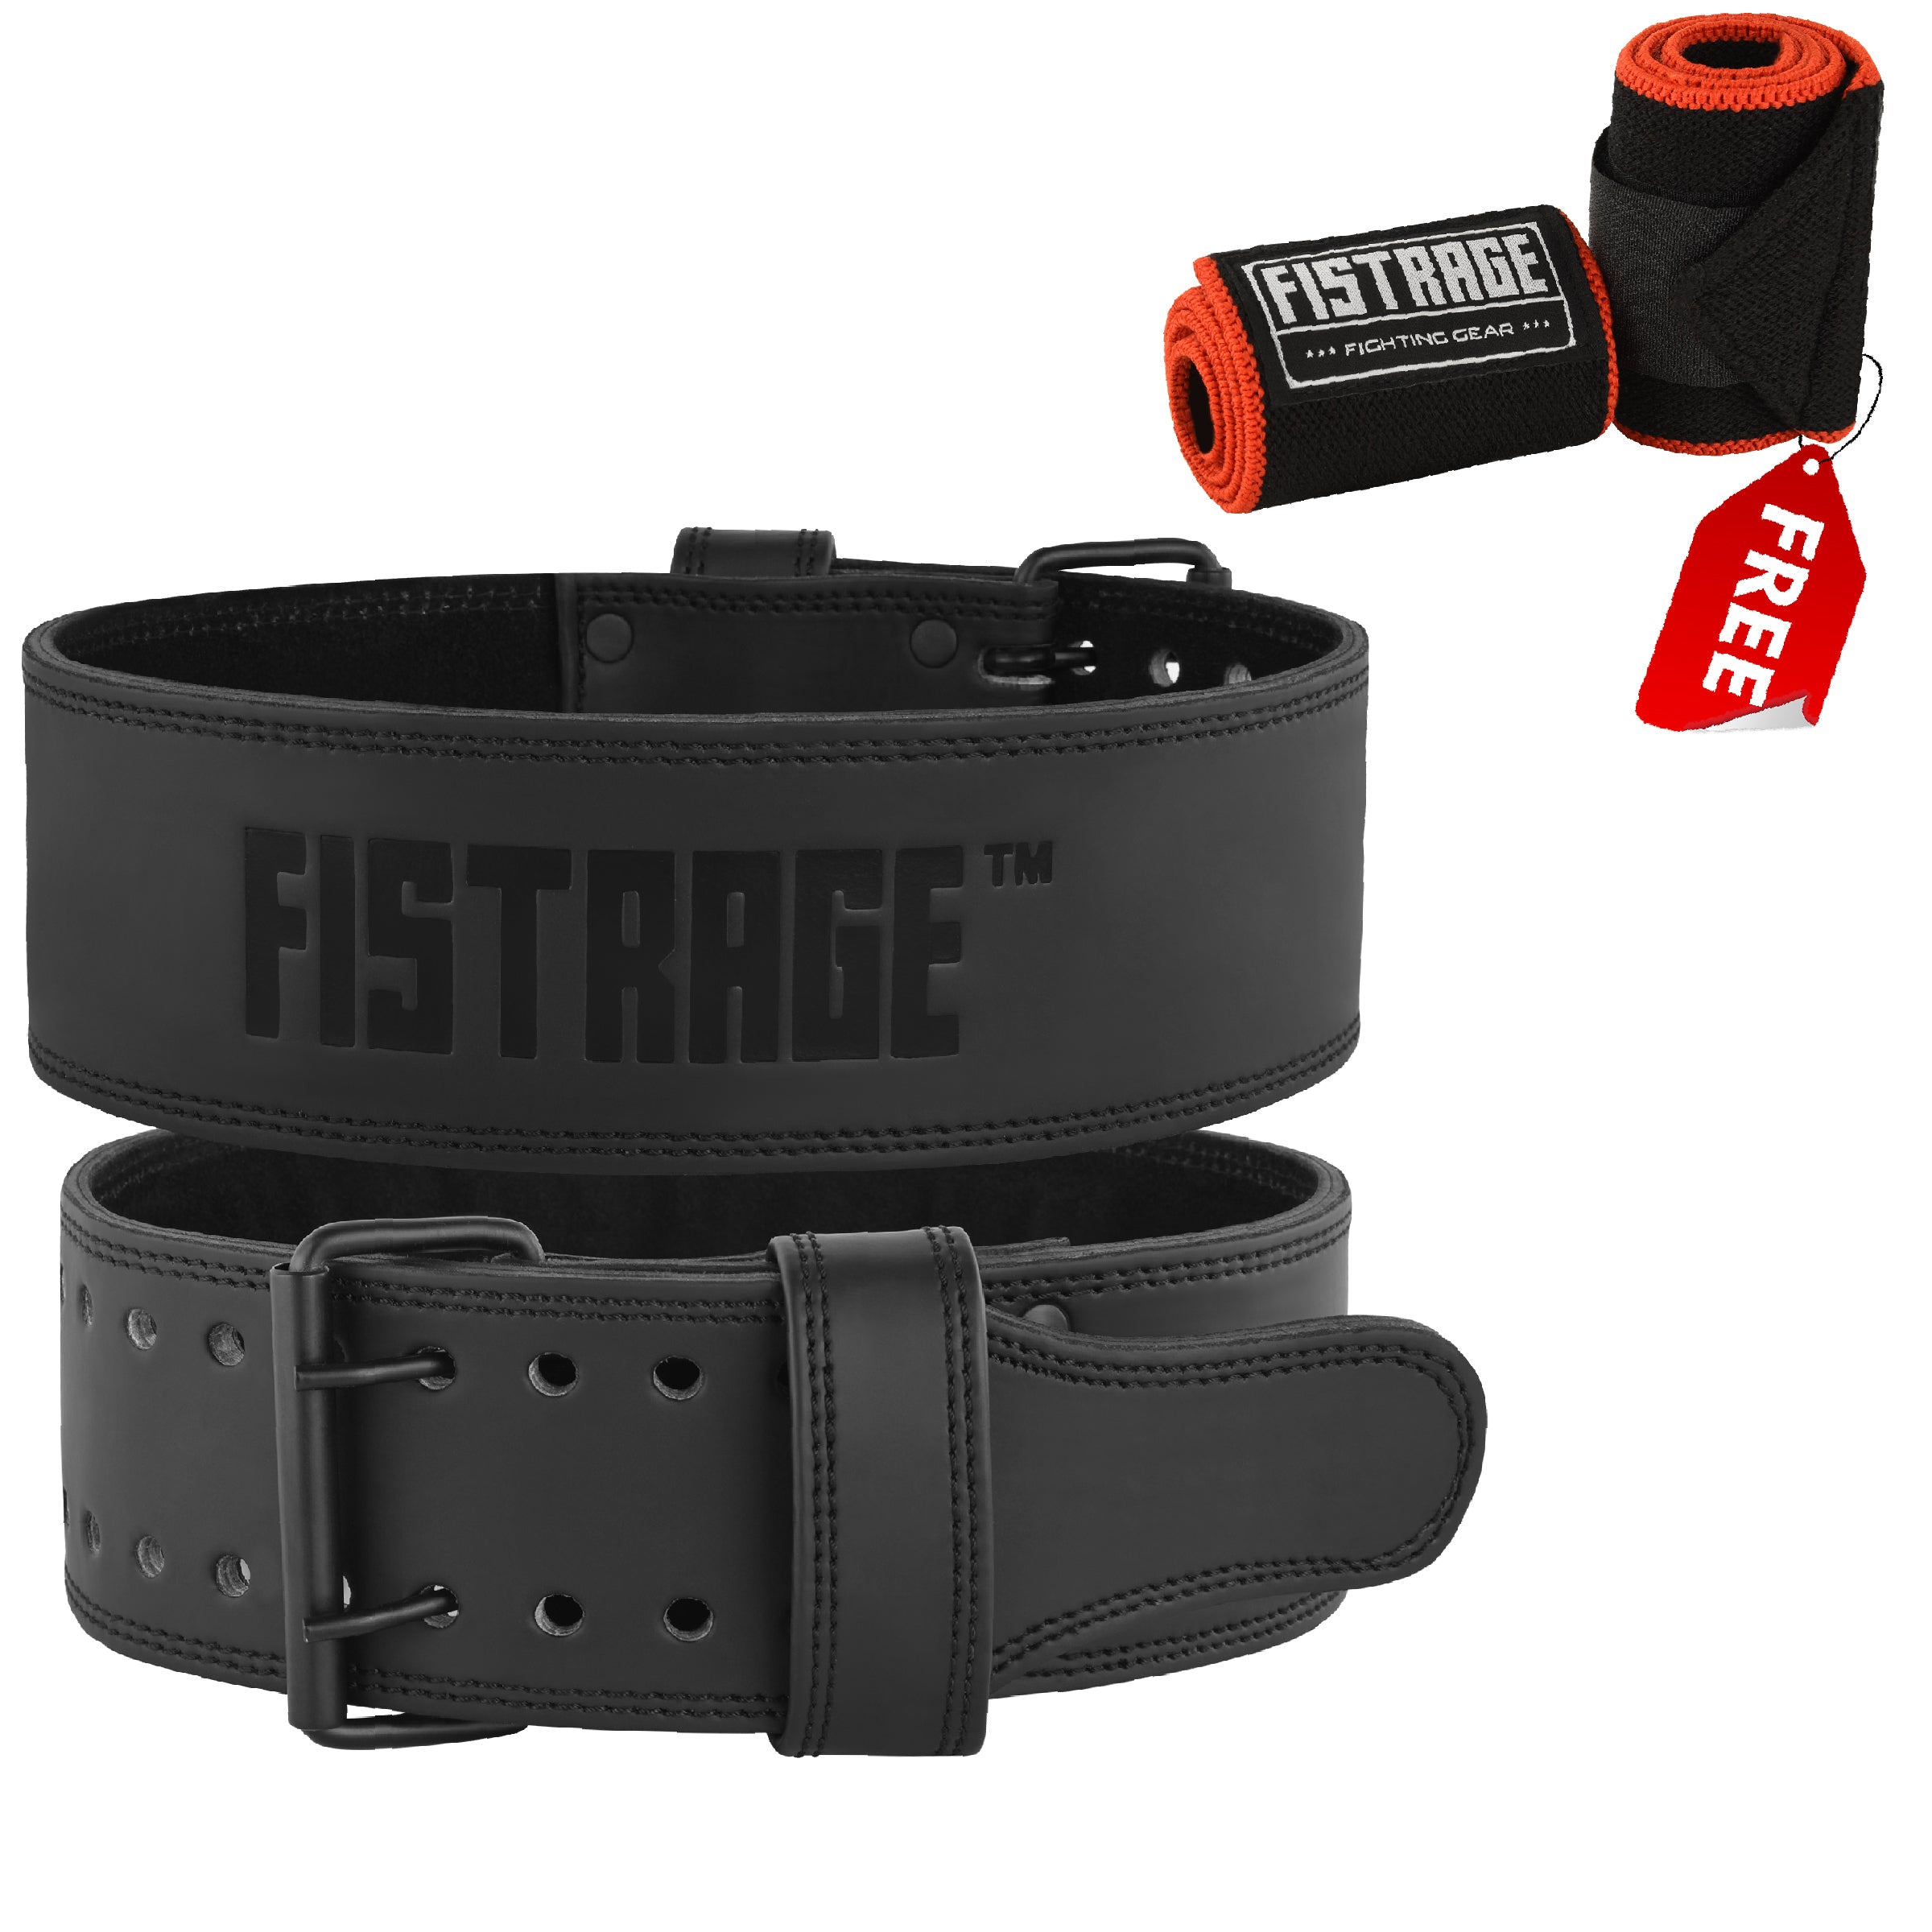 Velcro Lifting Belt | Size XL in Black by 1st Phorm